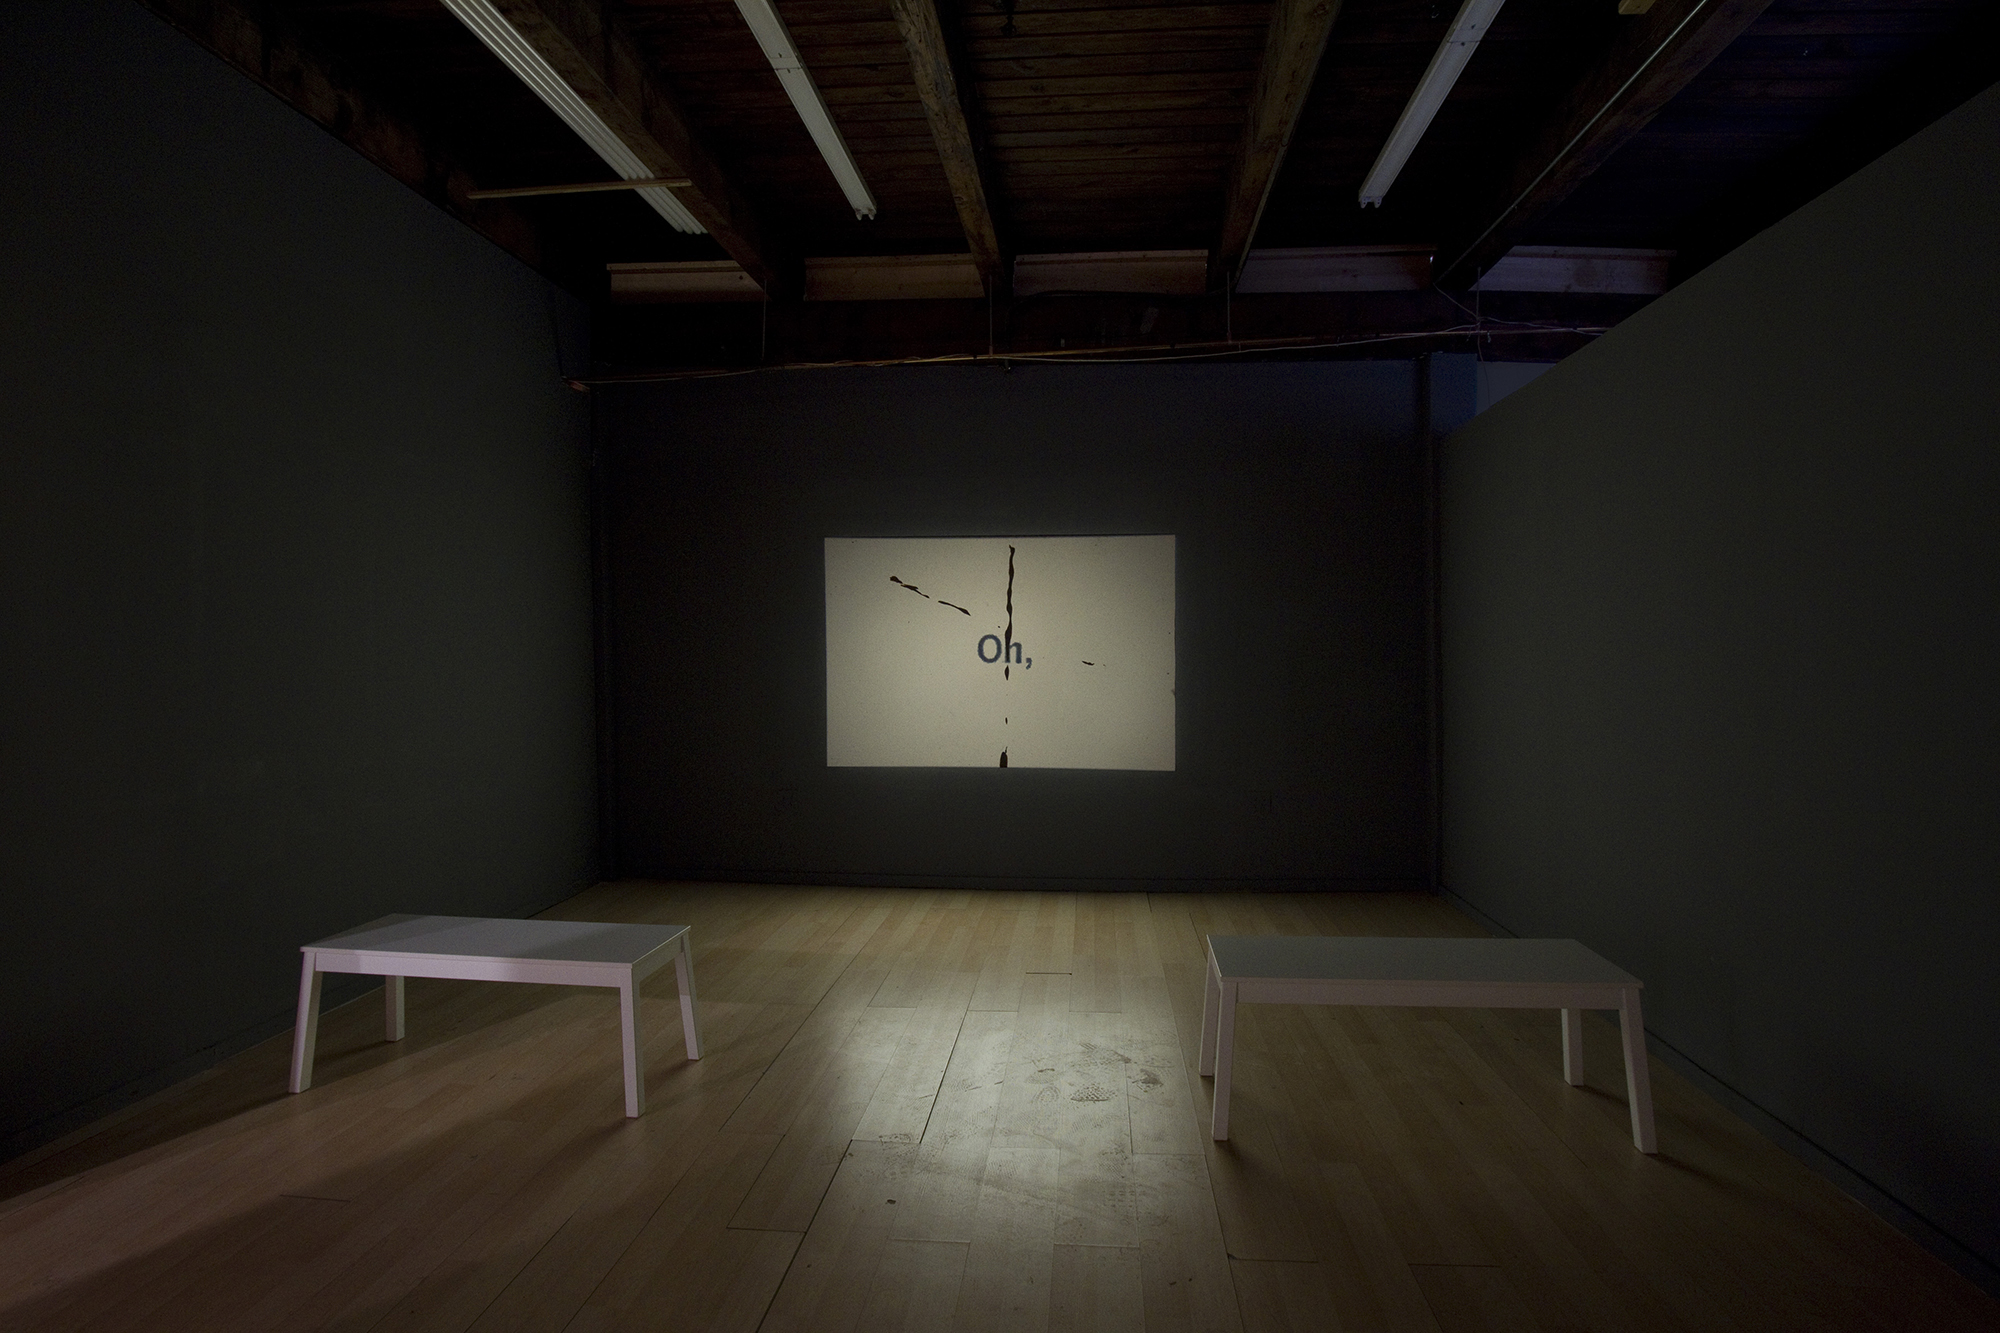 Installation view. Photo: Nathaniel Young